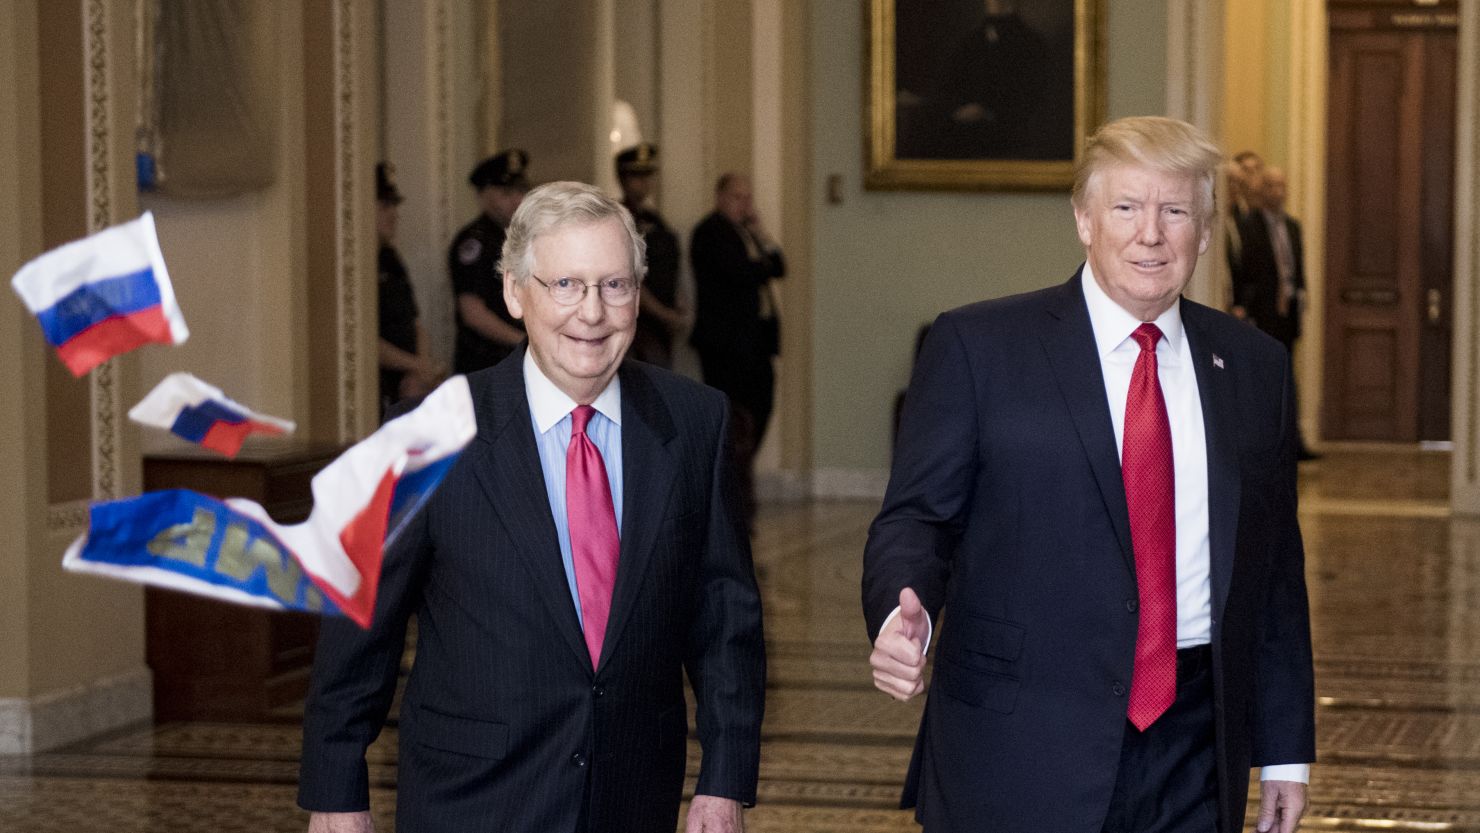 A protester throws Russian flags towards Senate Majority Leader Mitch McConnell and President Trump as they arrive for the Senate Republicans' policy lunch in the Capitol on Tuesday.